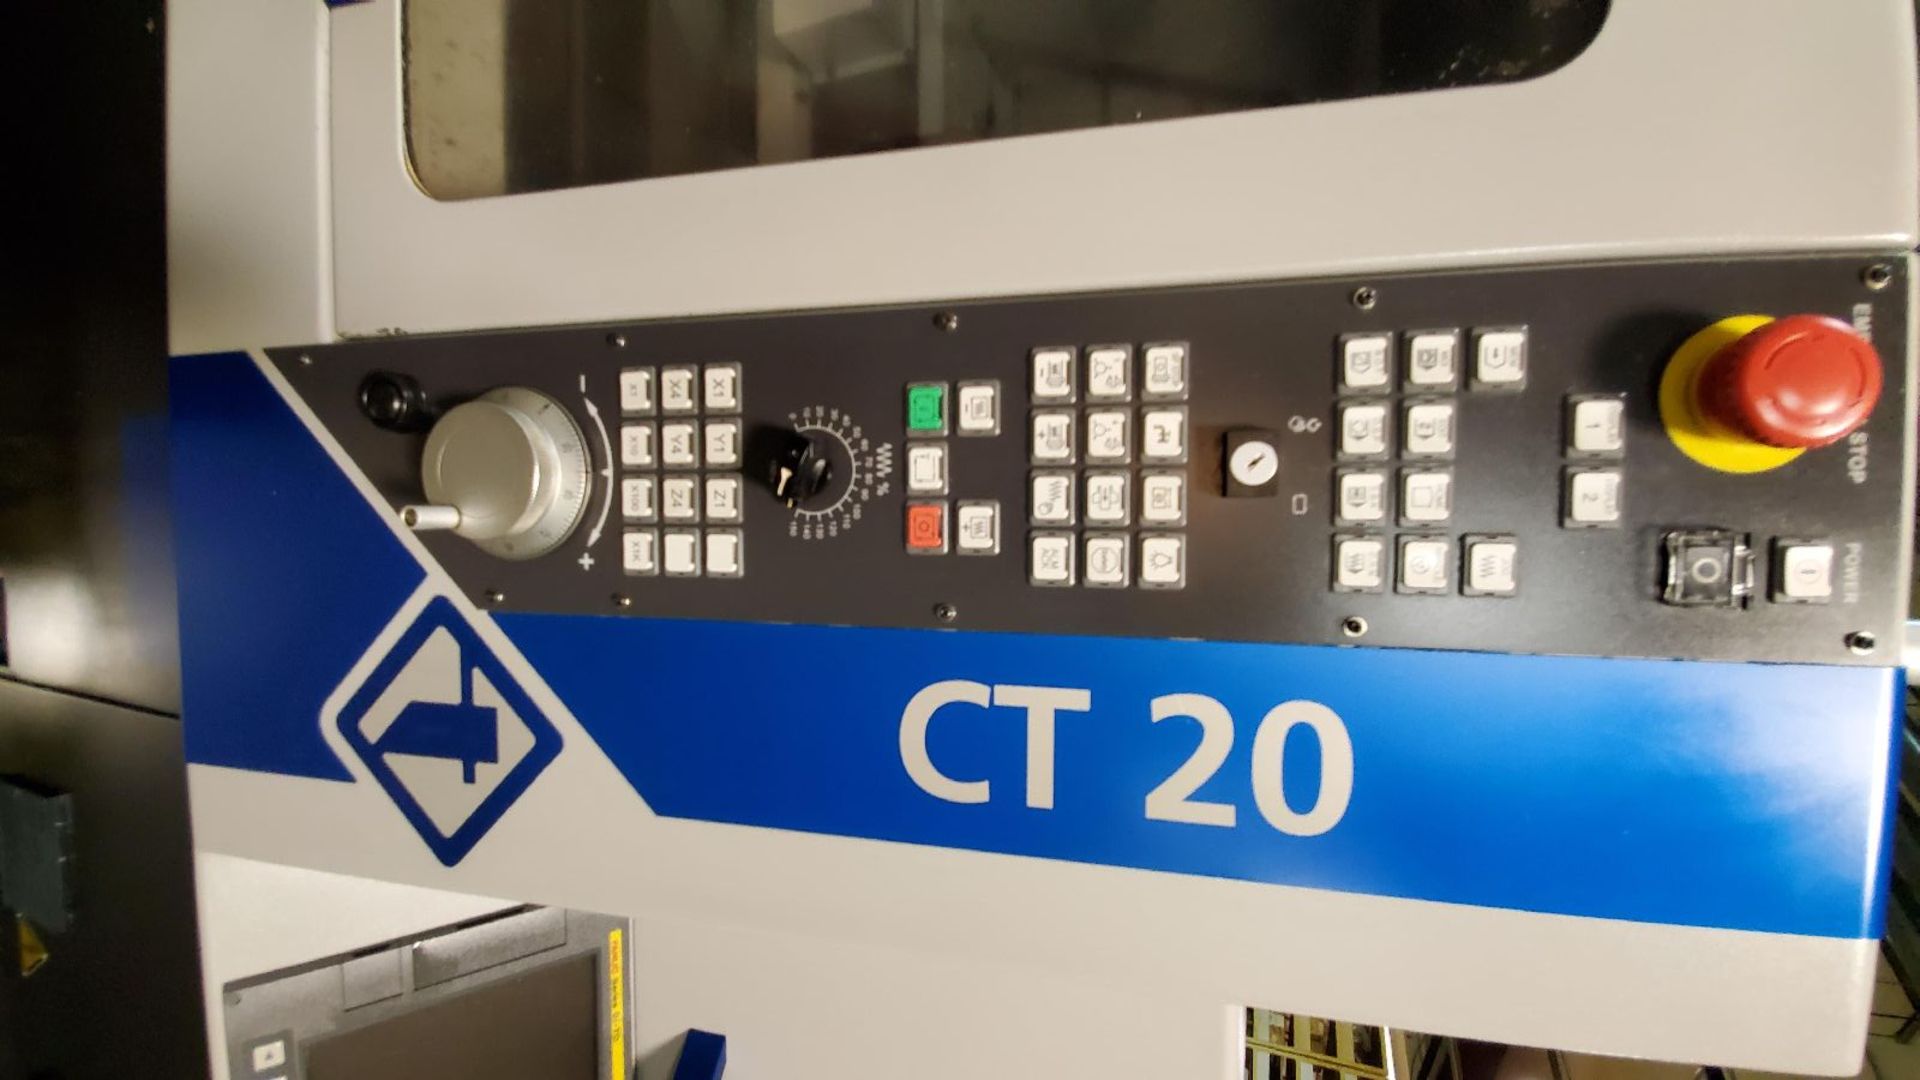 Tornos Model CT 20 7-Axis CNC Swiss-Type Lathe - Image 13 of 25